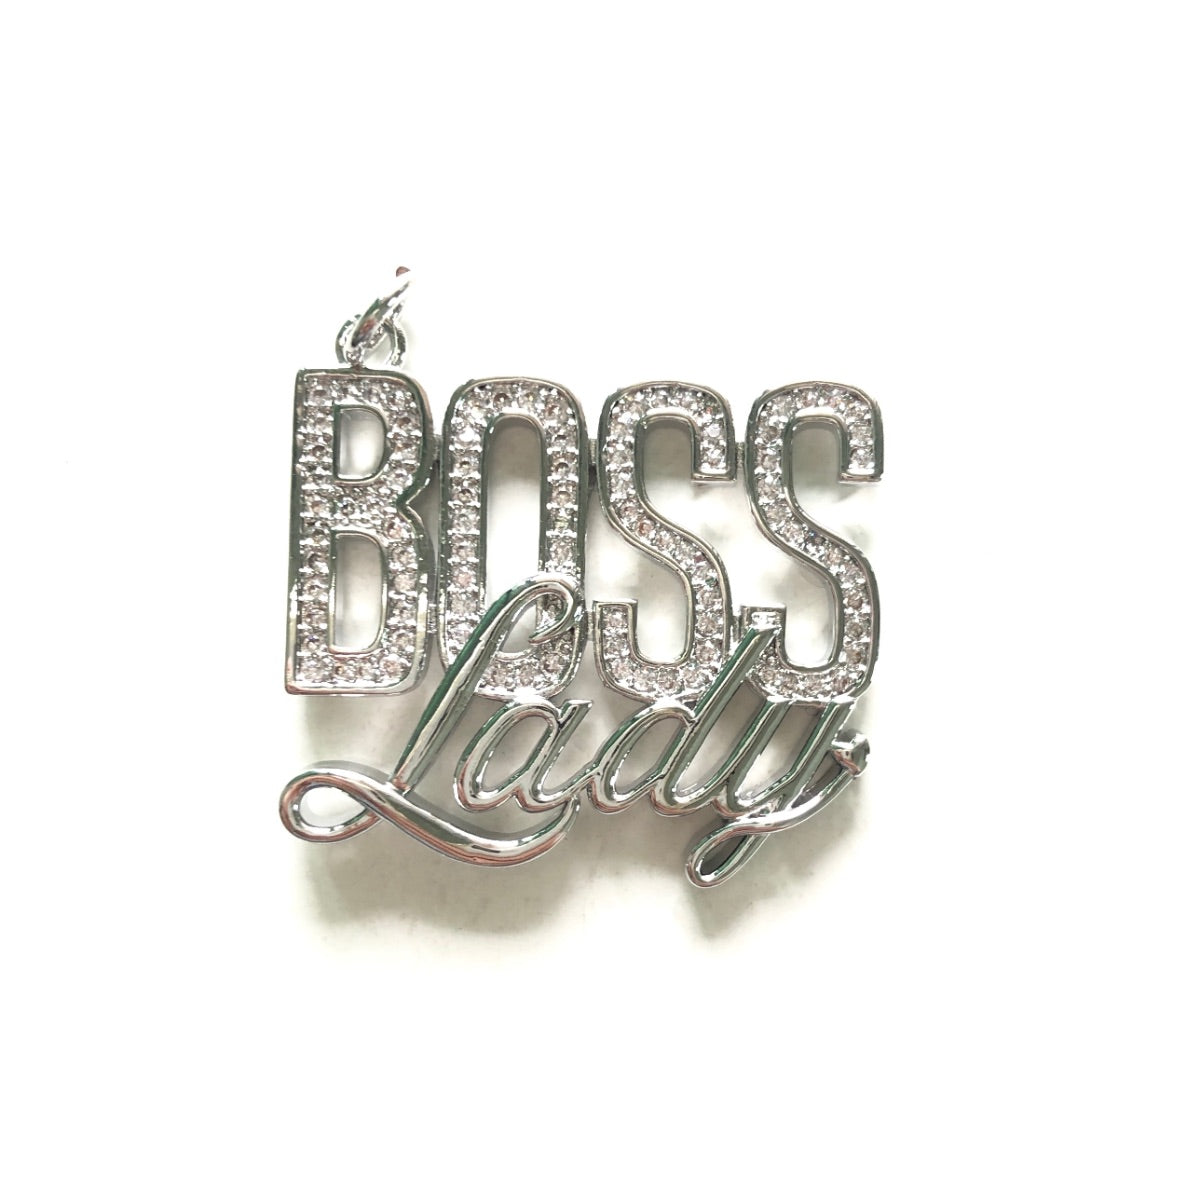 10pcs/lot 31*27.5mm CZ Pave Boss Lady Word Charms Silver CZ Paved Charms New Charms Arrivals Words & Quotes Charms Beads Beyond